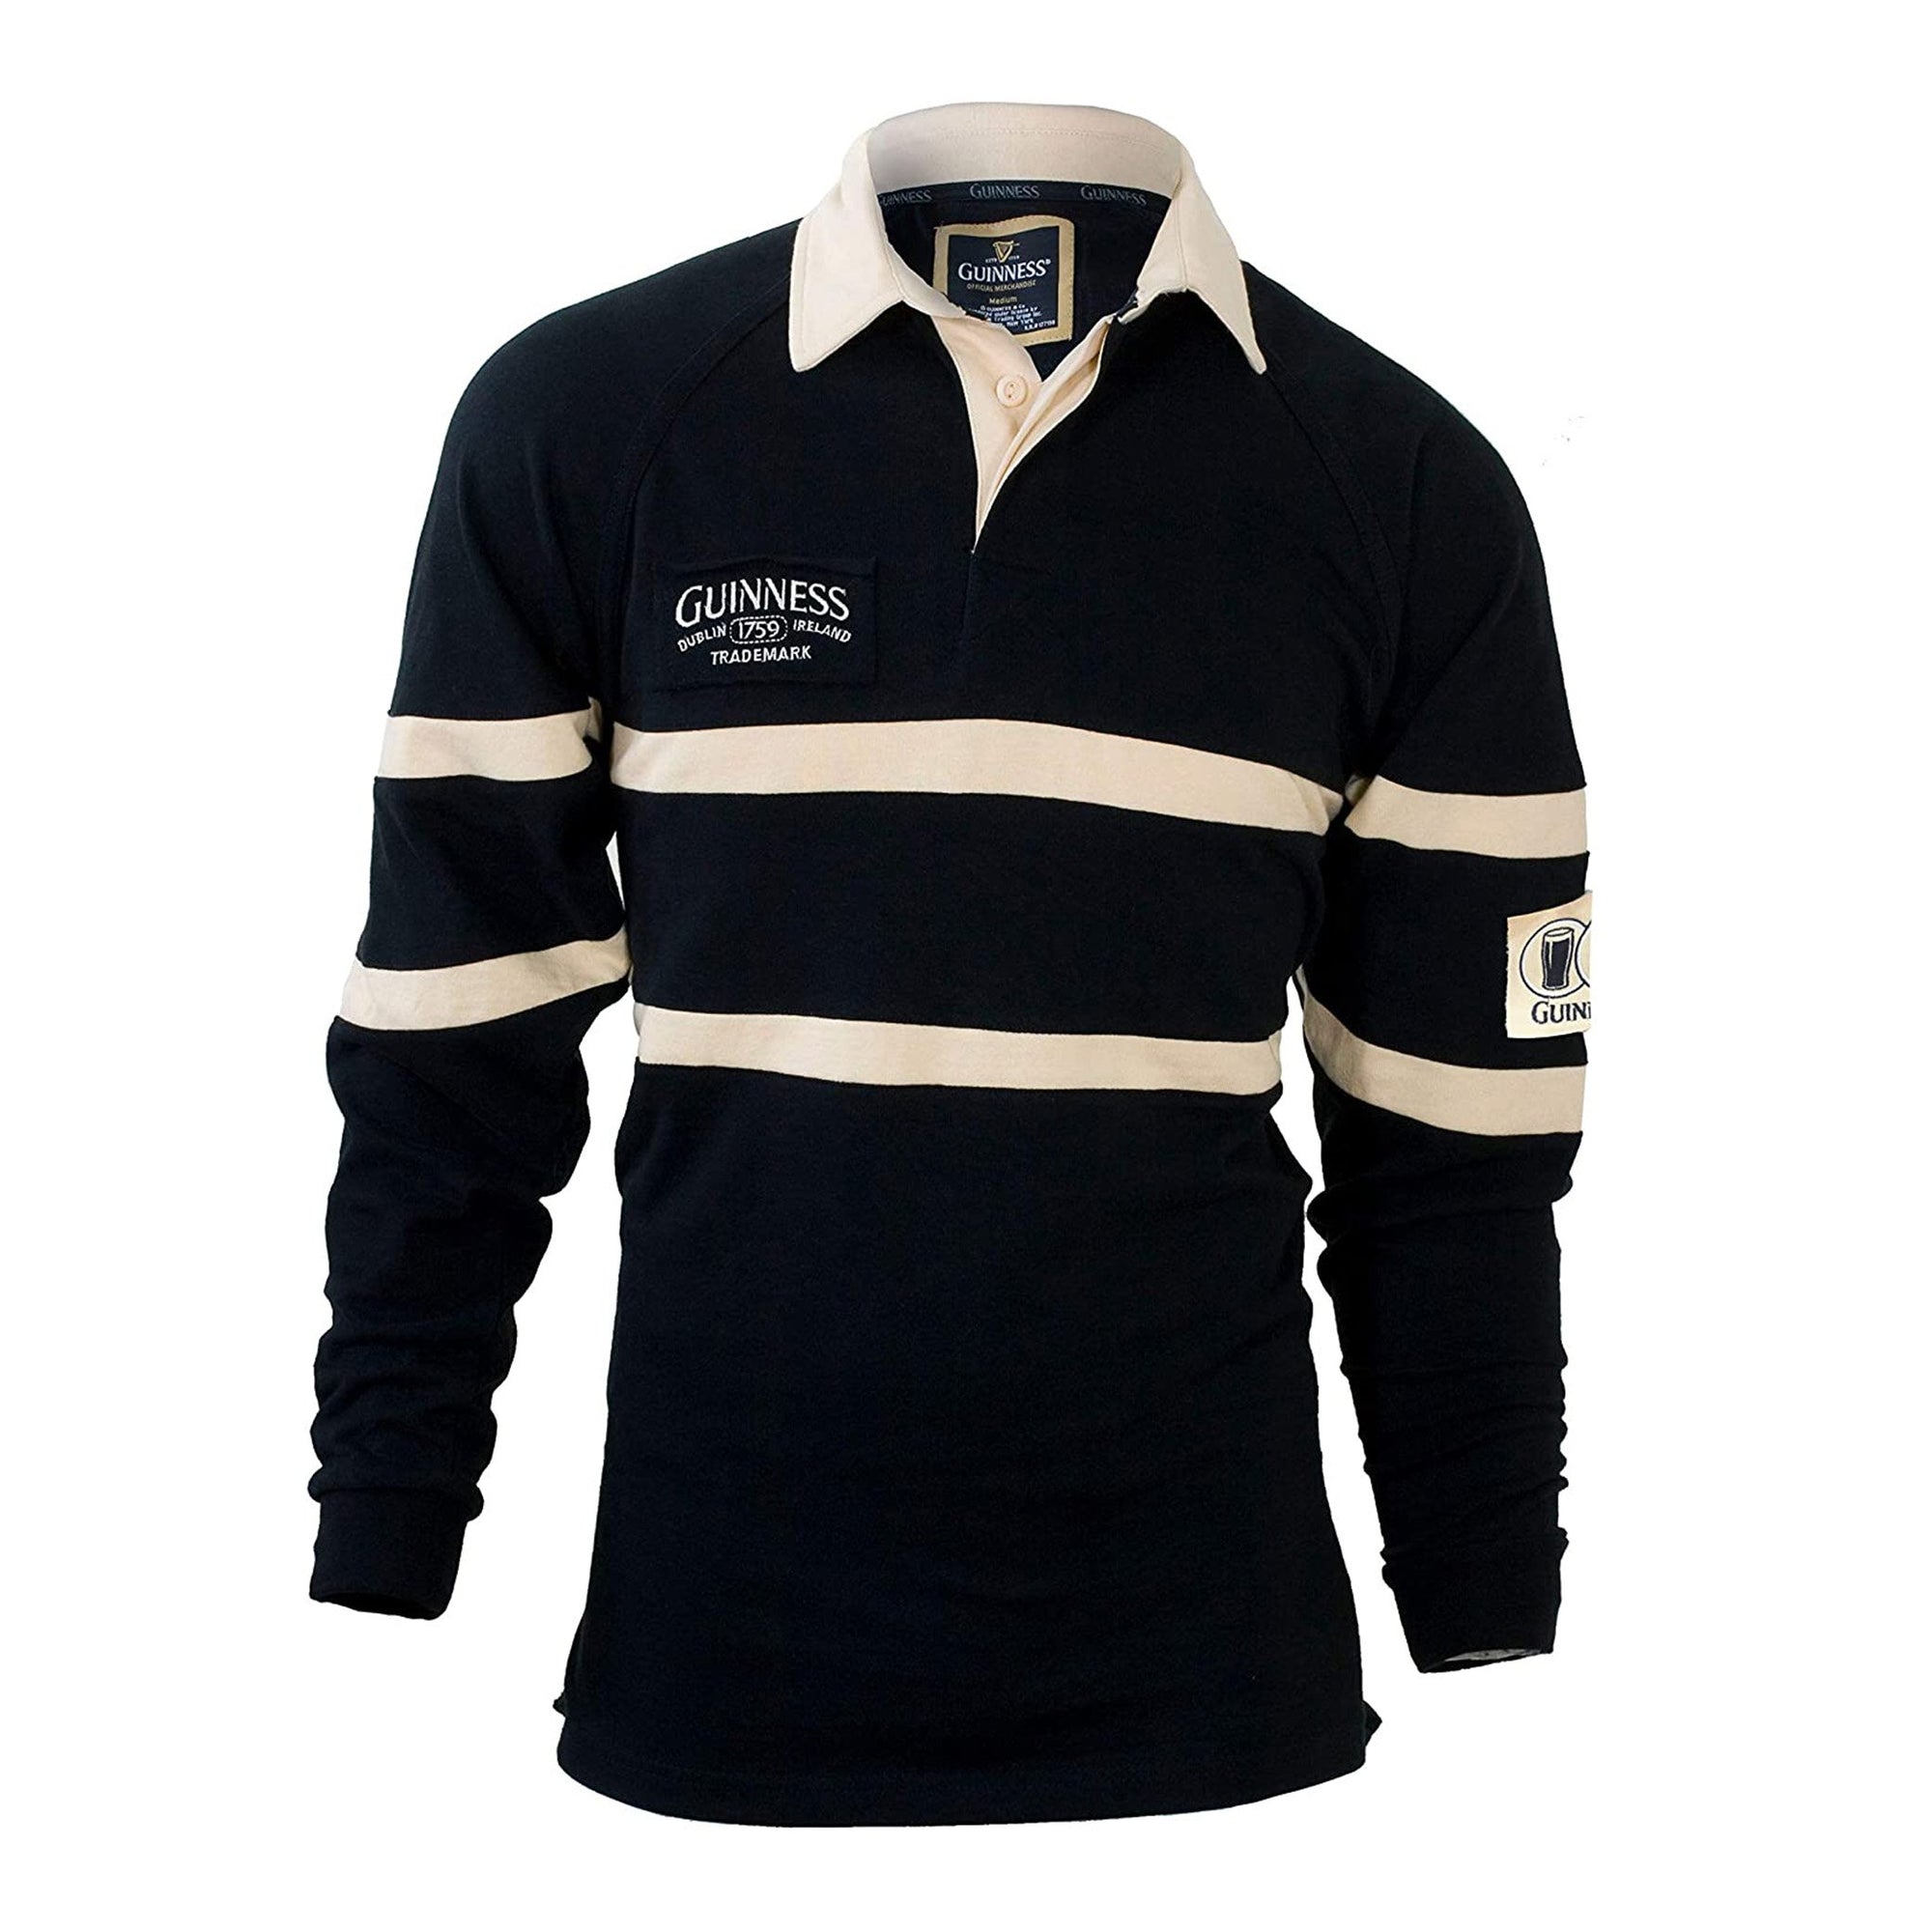 Rugby Imports - Authentic Rugby gear, Teamwear